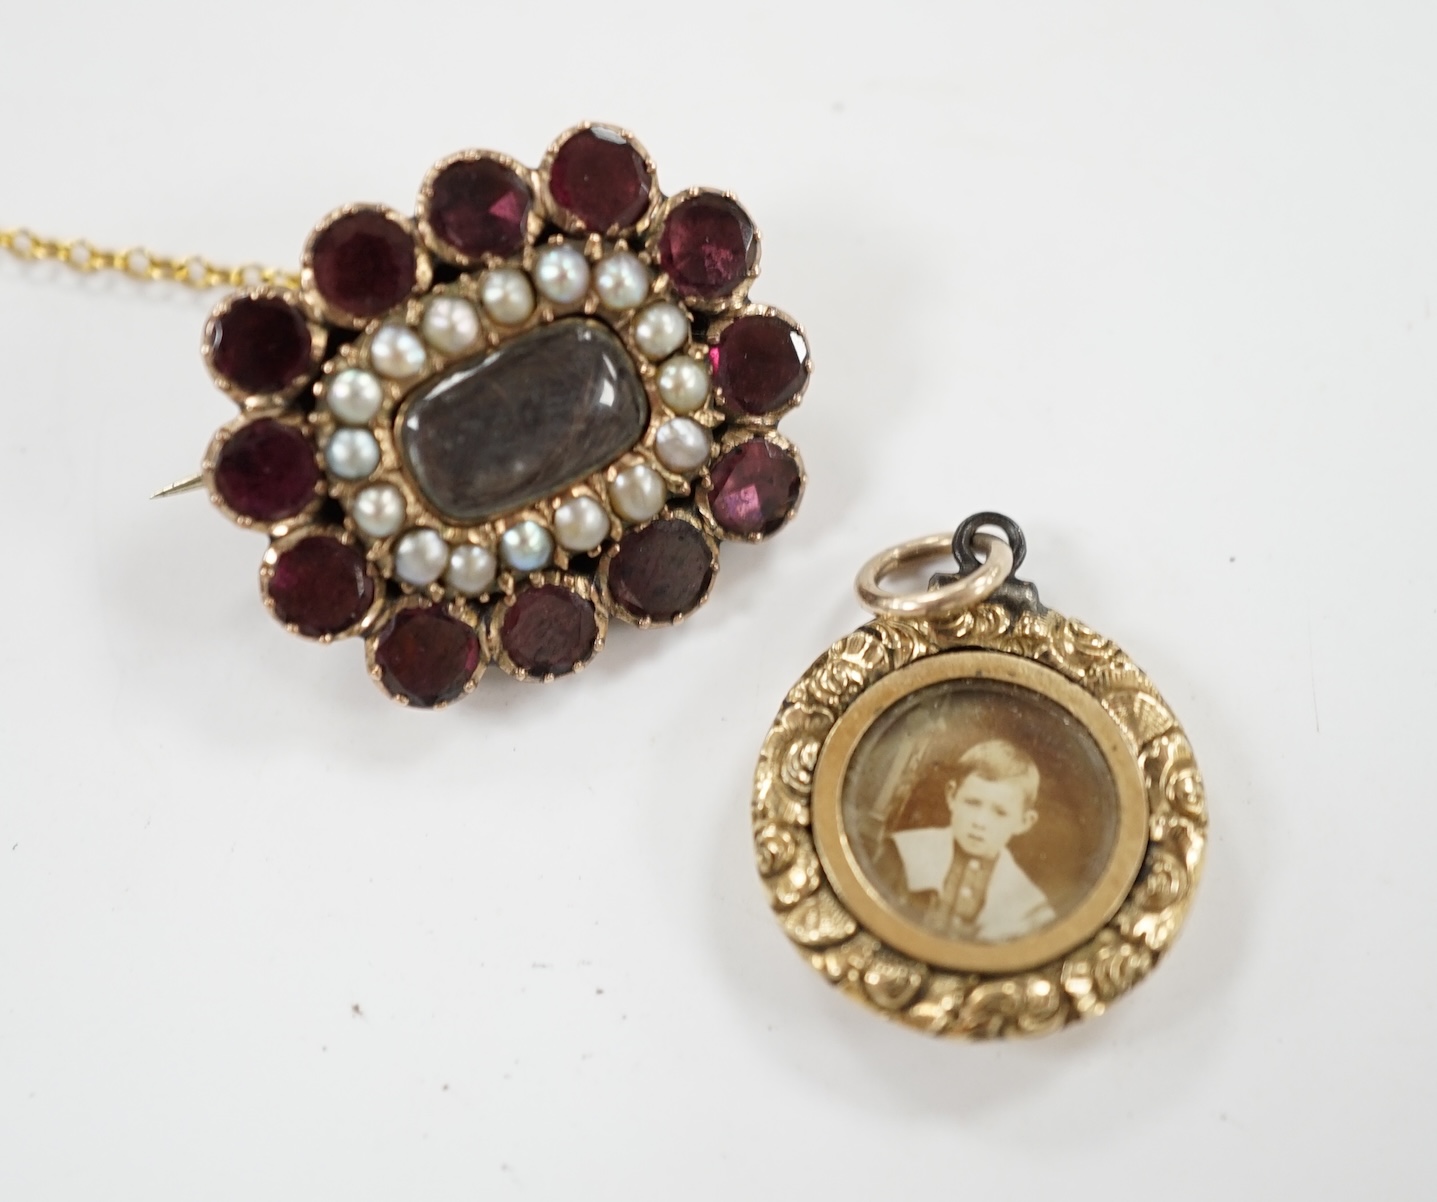 An early Victorian yellow metal, garnet and split pearl set mourning brooch, with engraved monogram, 23mm and a George IV mourning locket, inscribed 'Martha Lloyd, ob. 8th May, 1824 at 53'. Condition - fair